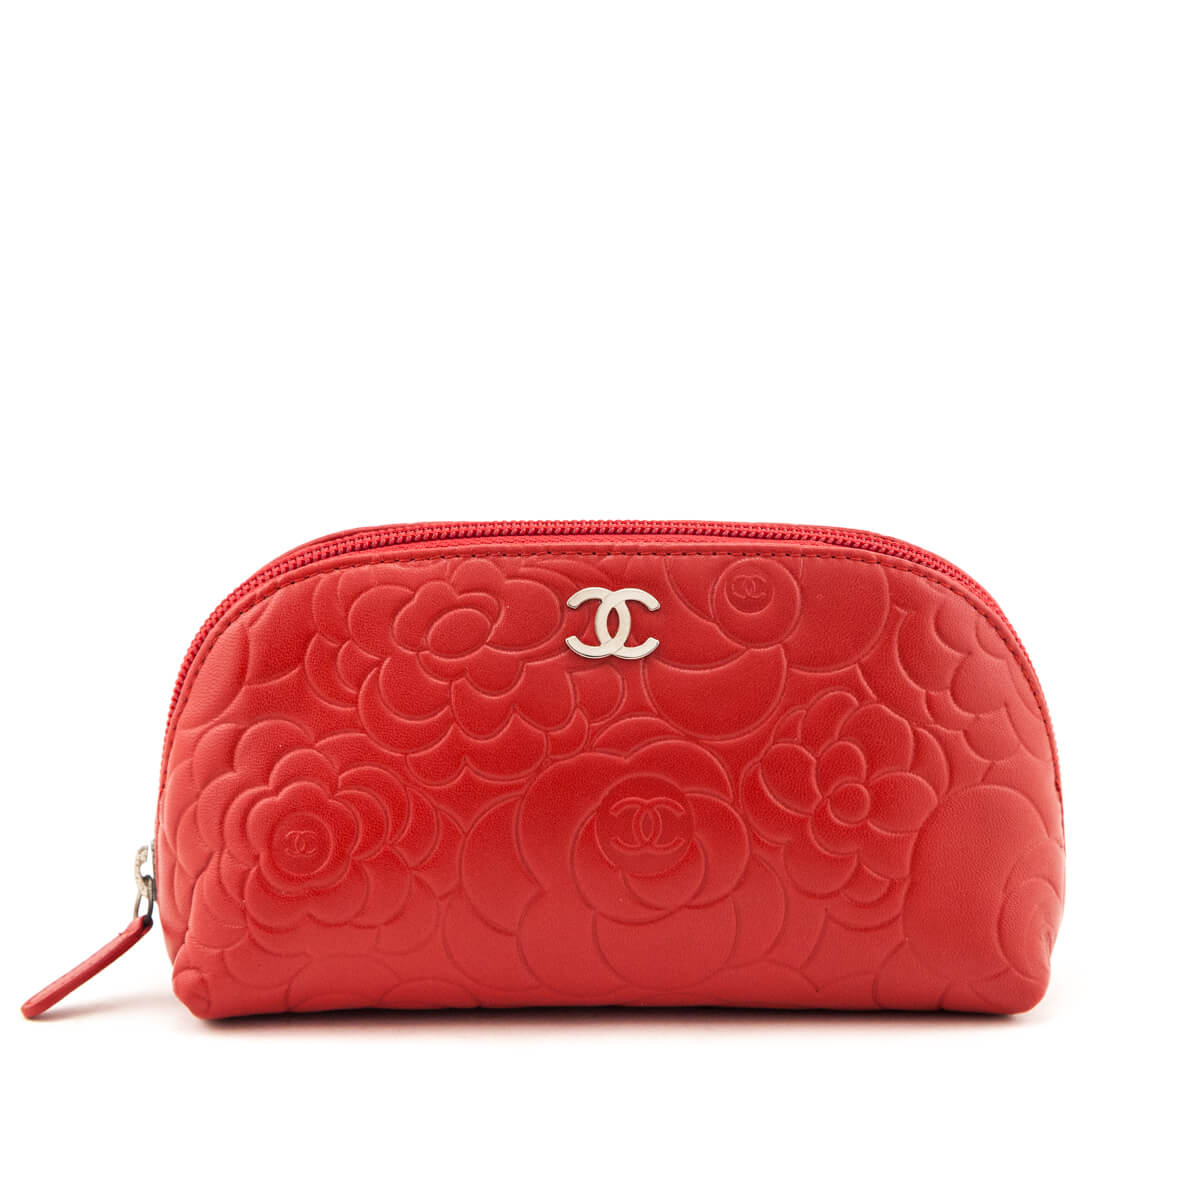 Chanel Dark Red Leather Camellia O Case - Love that Bag etc - Preowned Authentic Designer Handbags & Preloved Fashions